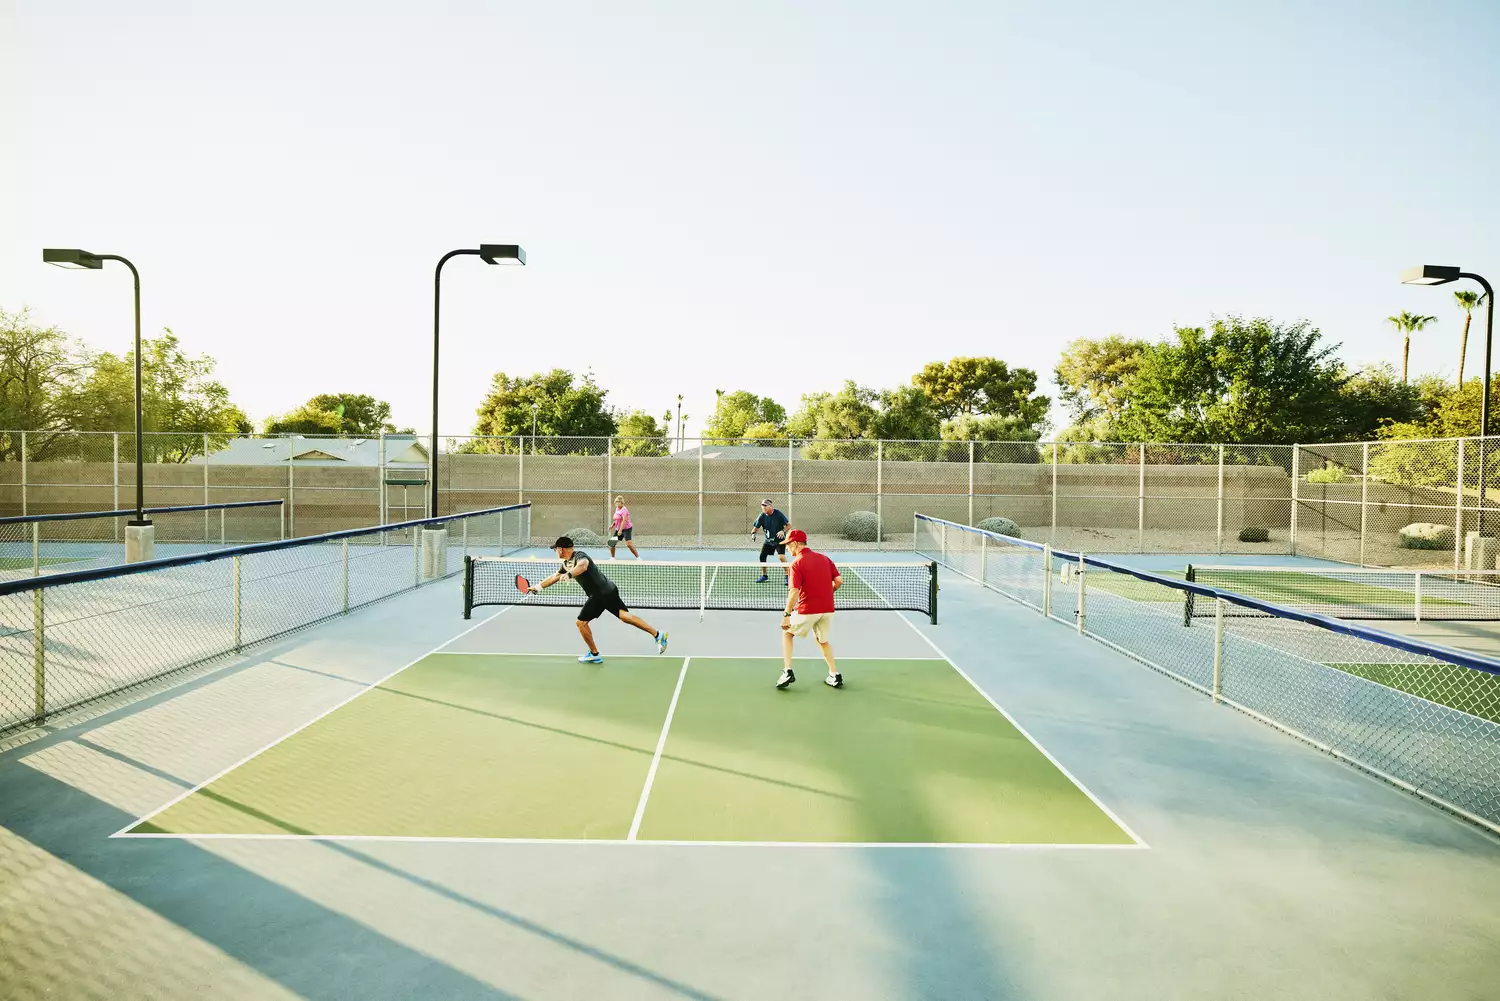 As pickleball becomes more popular, US hotels are adding more courts.